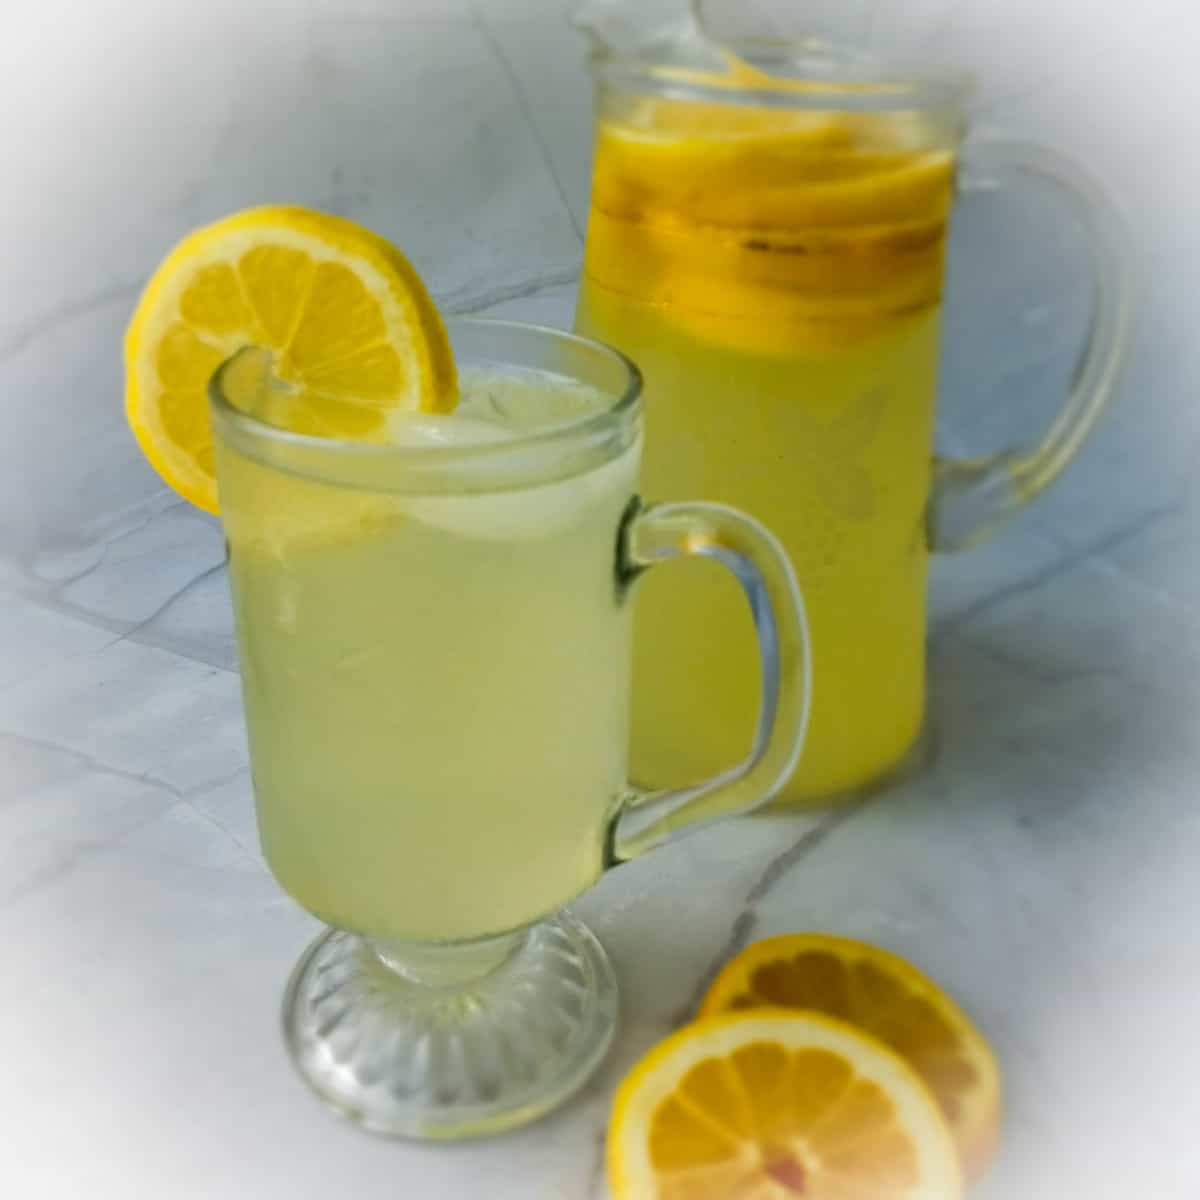 small pitcher of Amish lemonade and a cup full of lemonade with a lemon slice